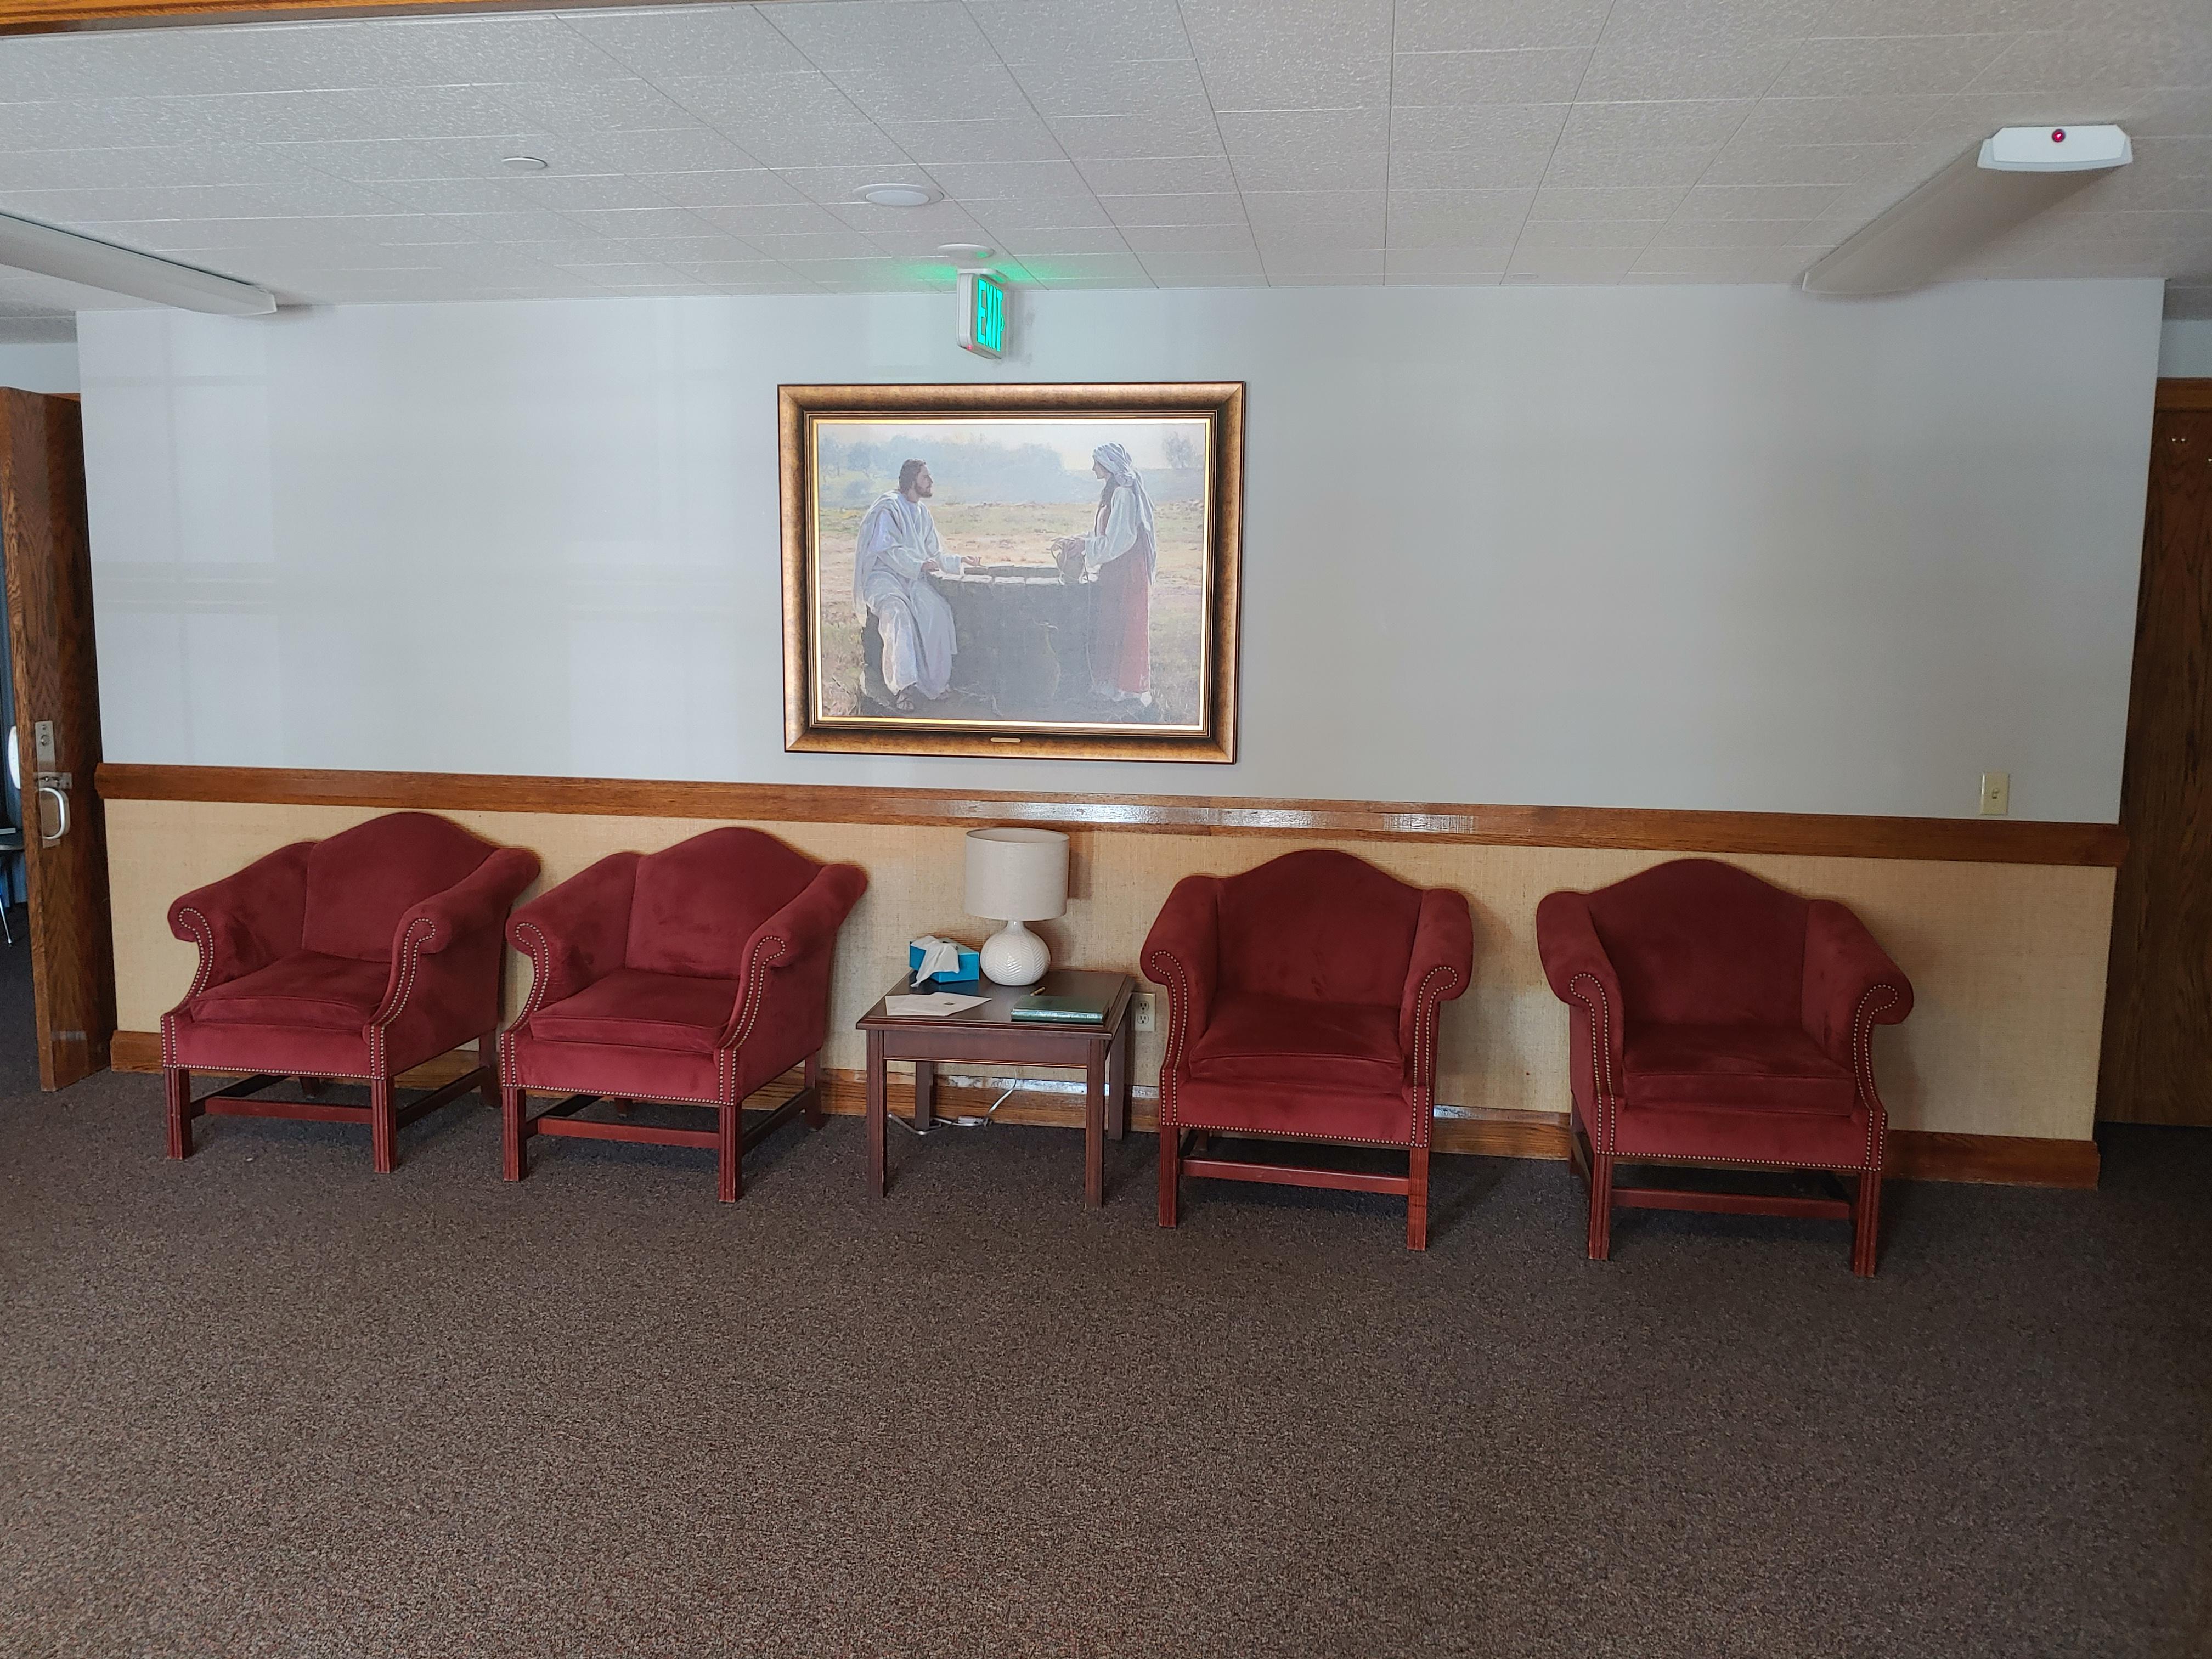 Foyer of the Perrysburg meetinghouse of The Church of Jesus Christ of Latter-day Saints located at 11050 Avenue Rd, Perrysburg, OH 43551.